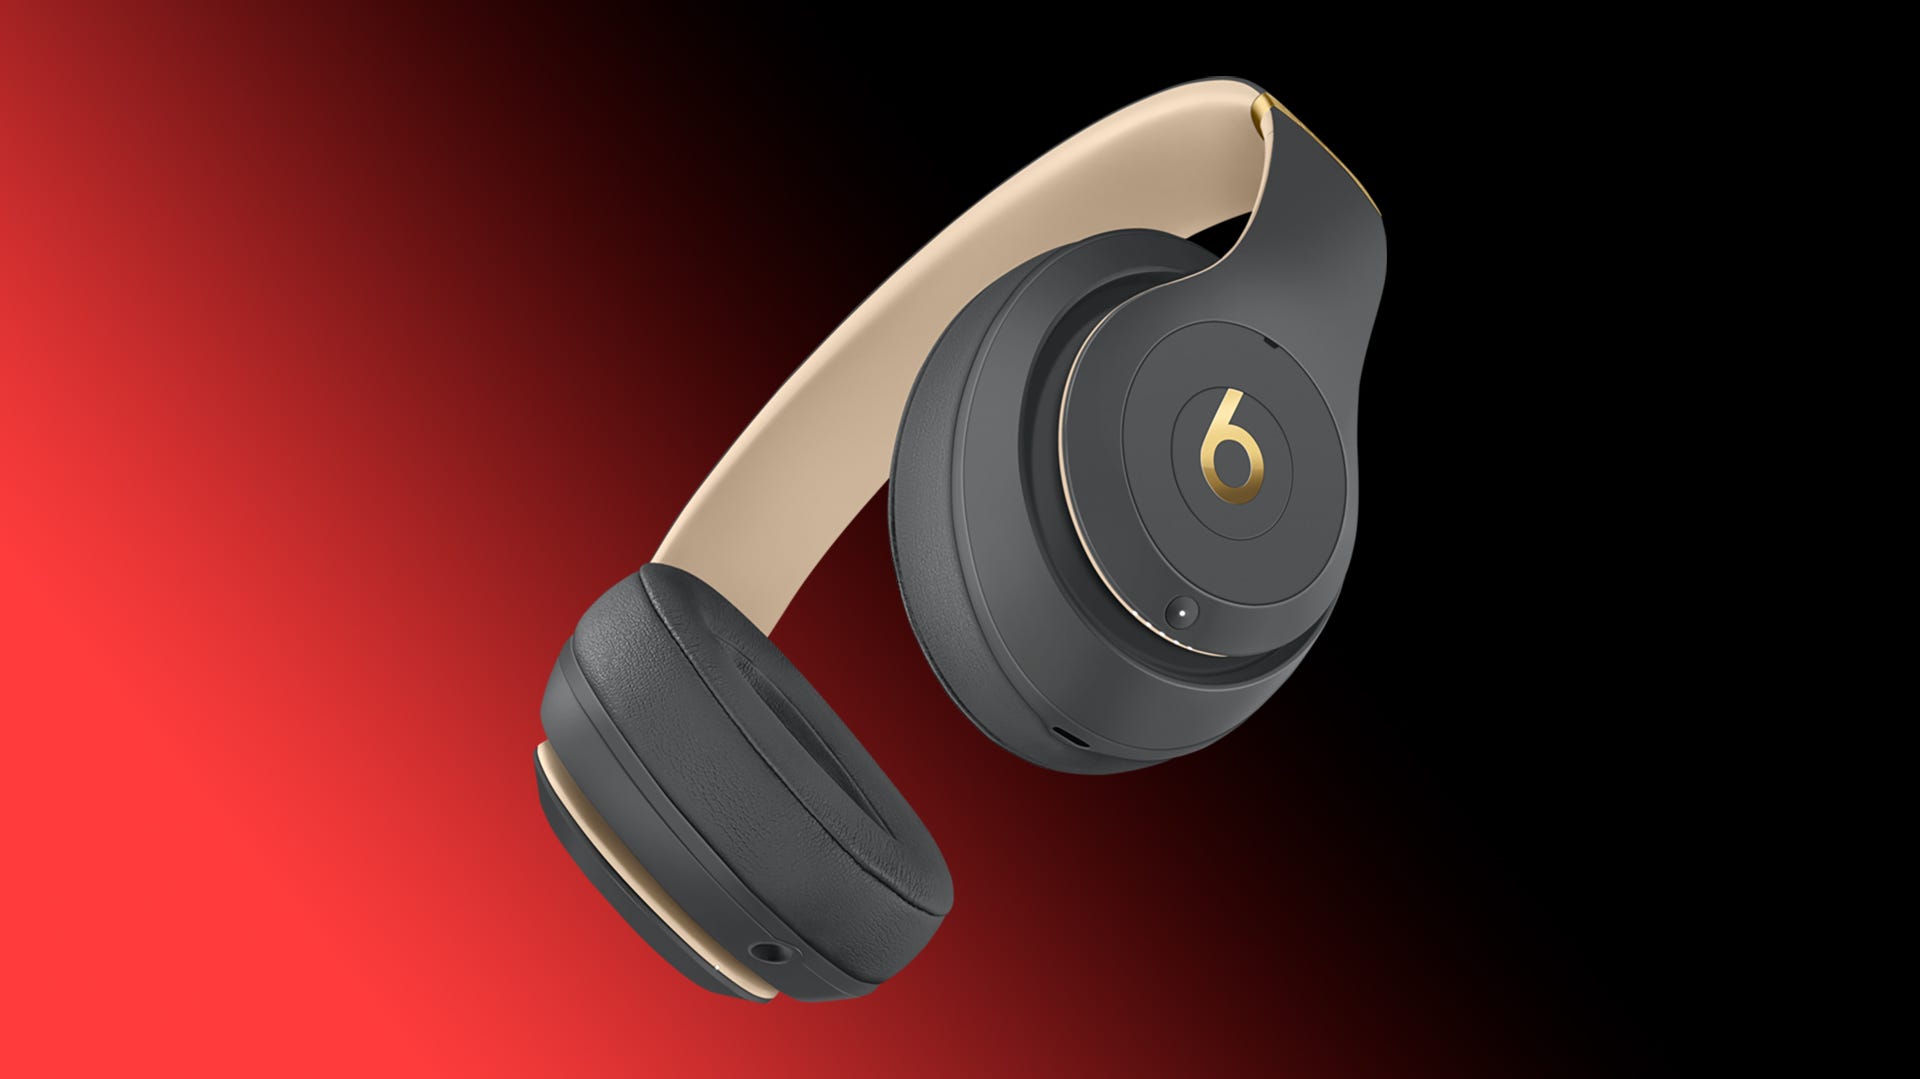 $99 Beats are the cheapest Apple headphones you can get on Black